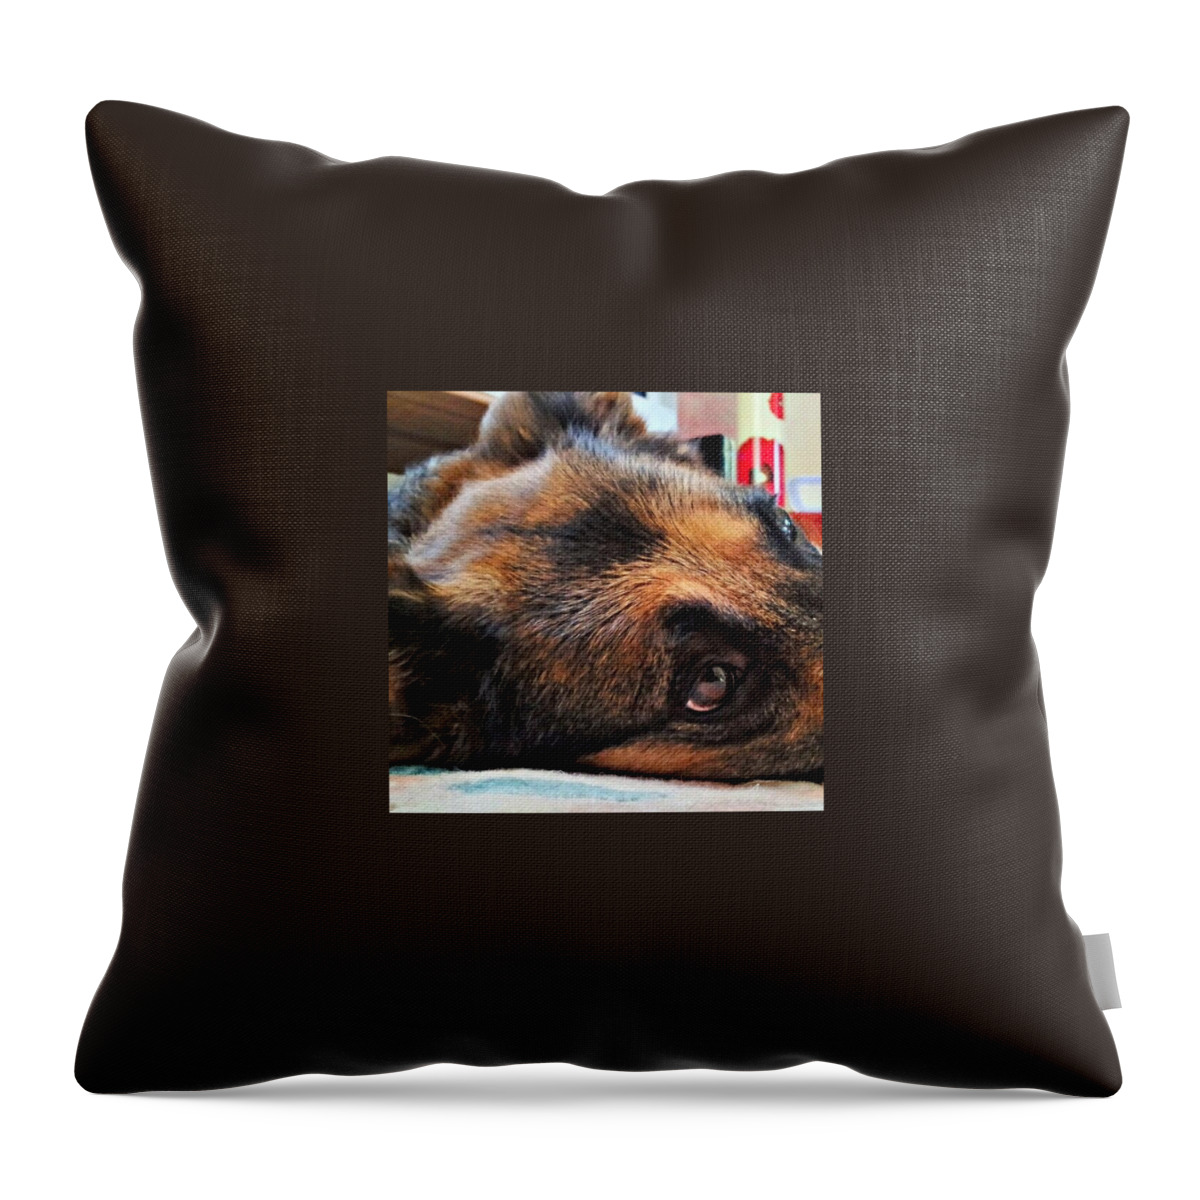 Pawsforthought Throw Pillow featuring the photograph #dogs #pawsforthought #ilovemydog by Abbie Shores